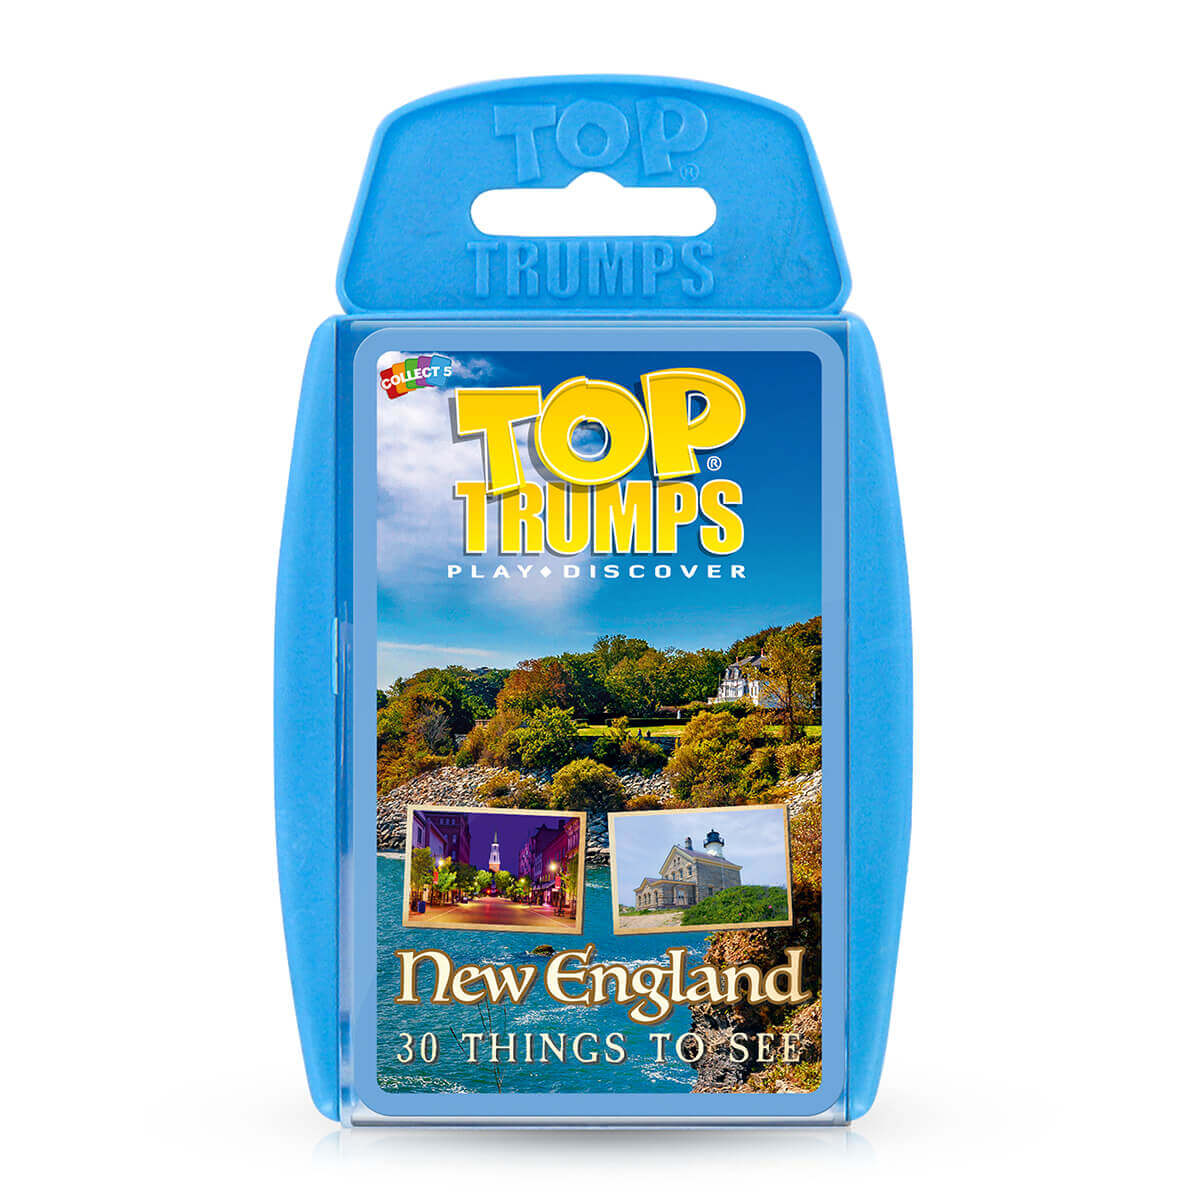 New England Top Trumps Cards Game - 30 Things To Do and See